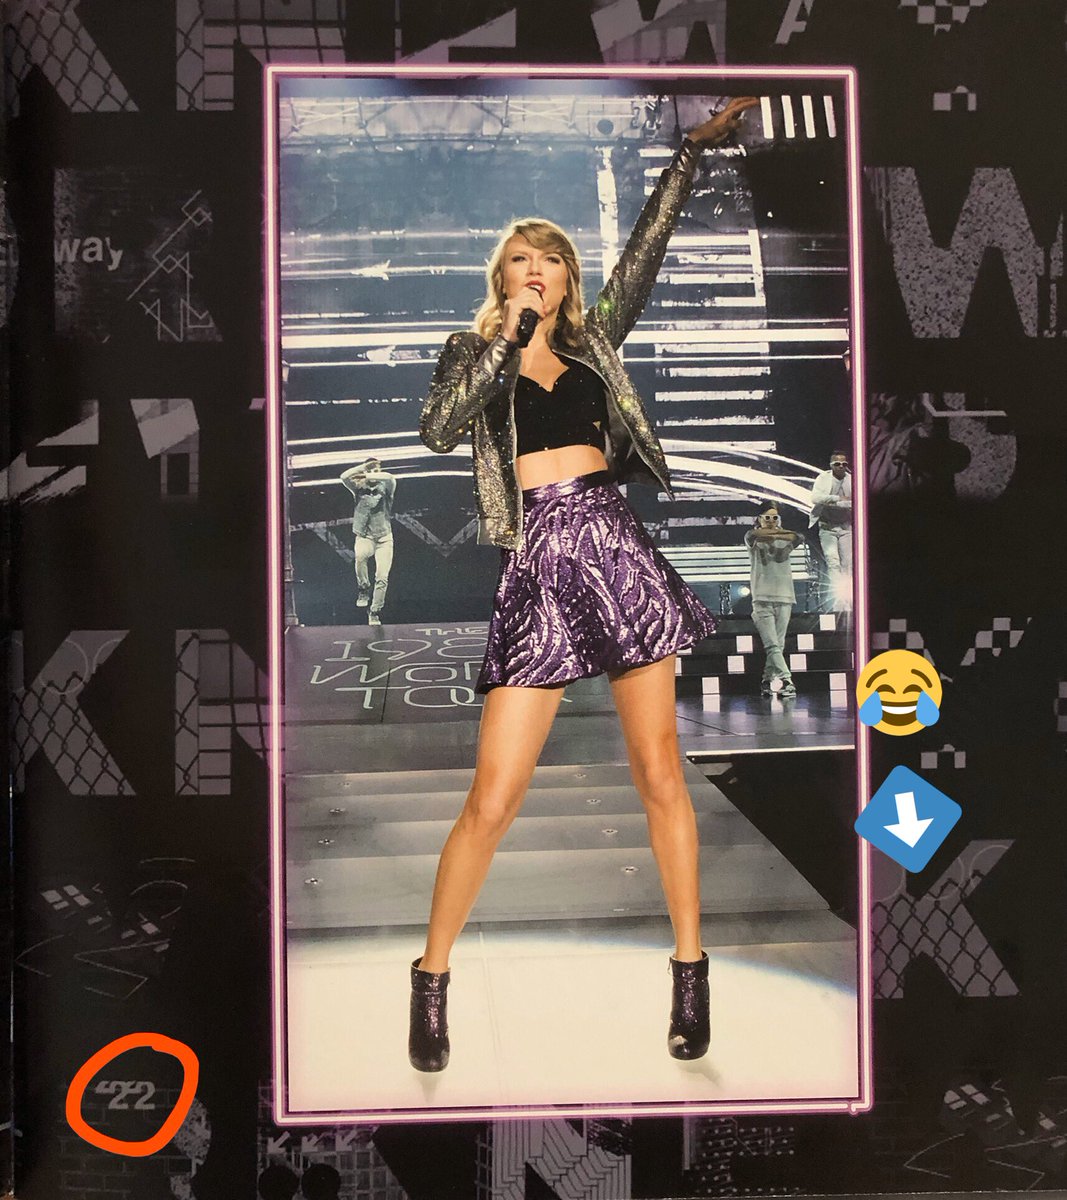 Look I know this is a reach but she’s looking out the window at NYC in The Man, & since 5/22 keeps popping up, I thought I’d mention there’s a 5/22 (and a fence ) in the Welcome To New York tour graphics  @taylornation13  @taylorswift13